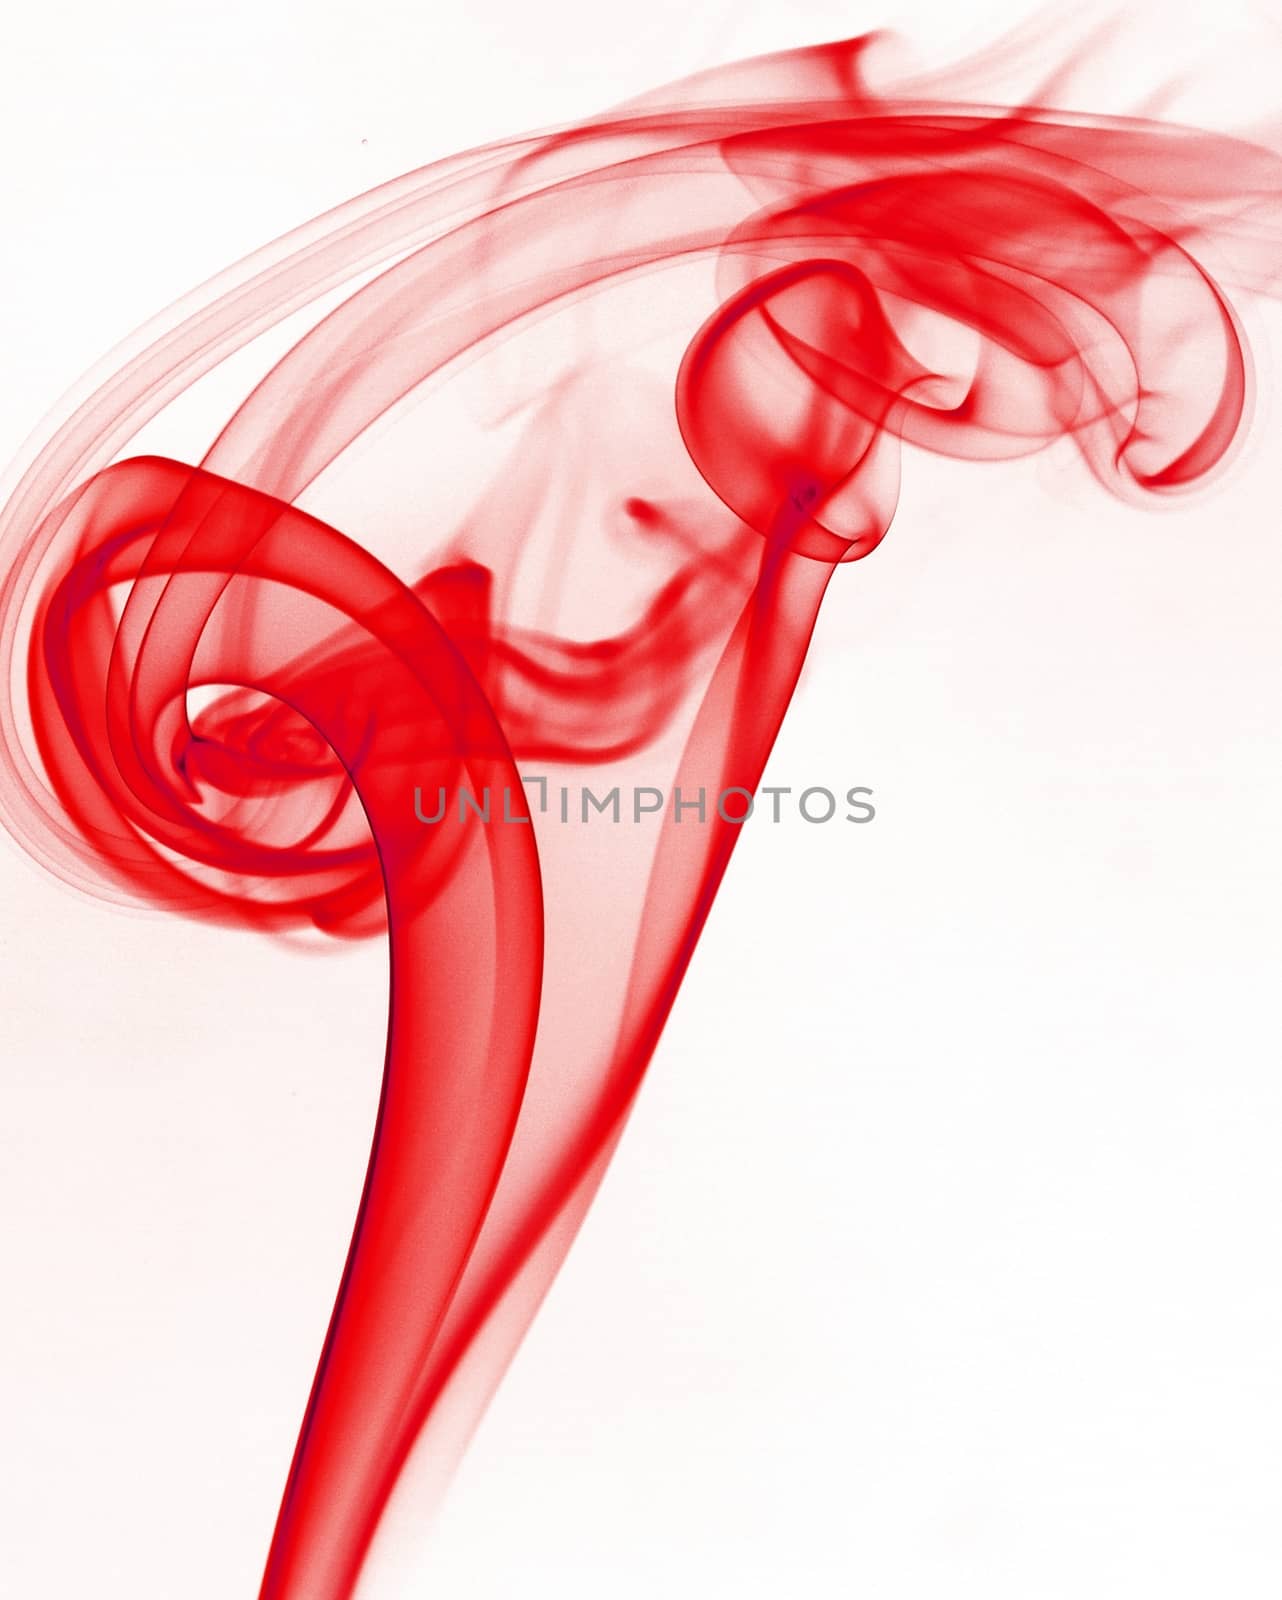 Abstract detail image of red smoke isolated on the white background.